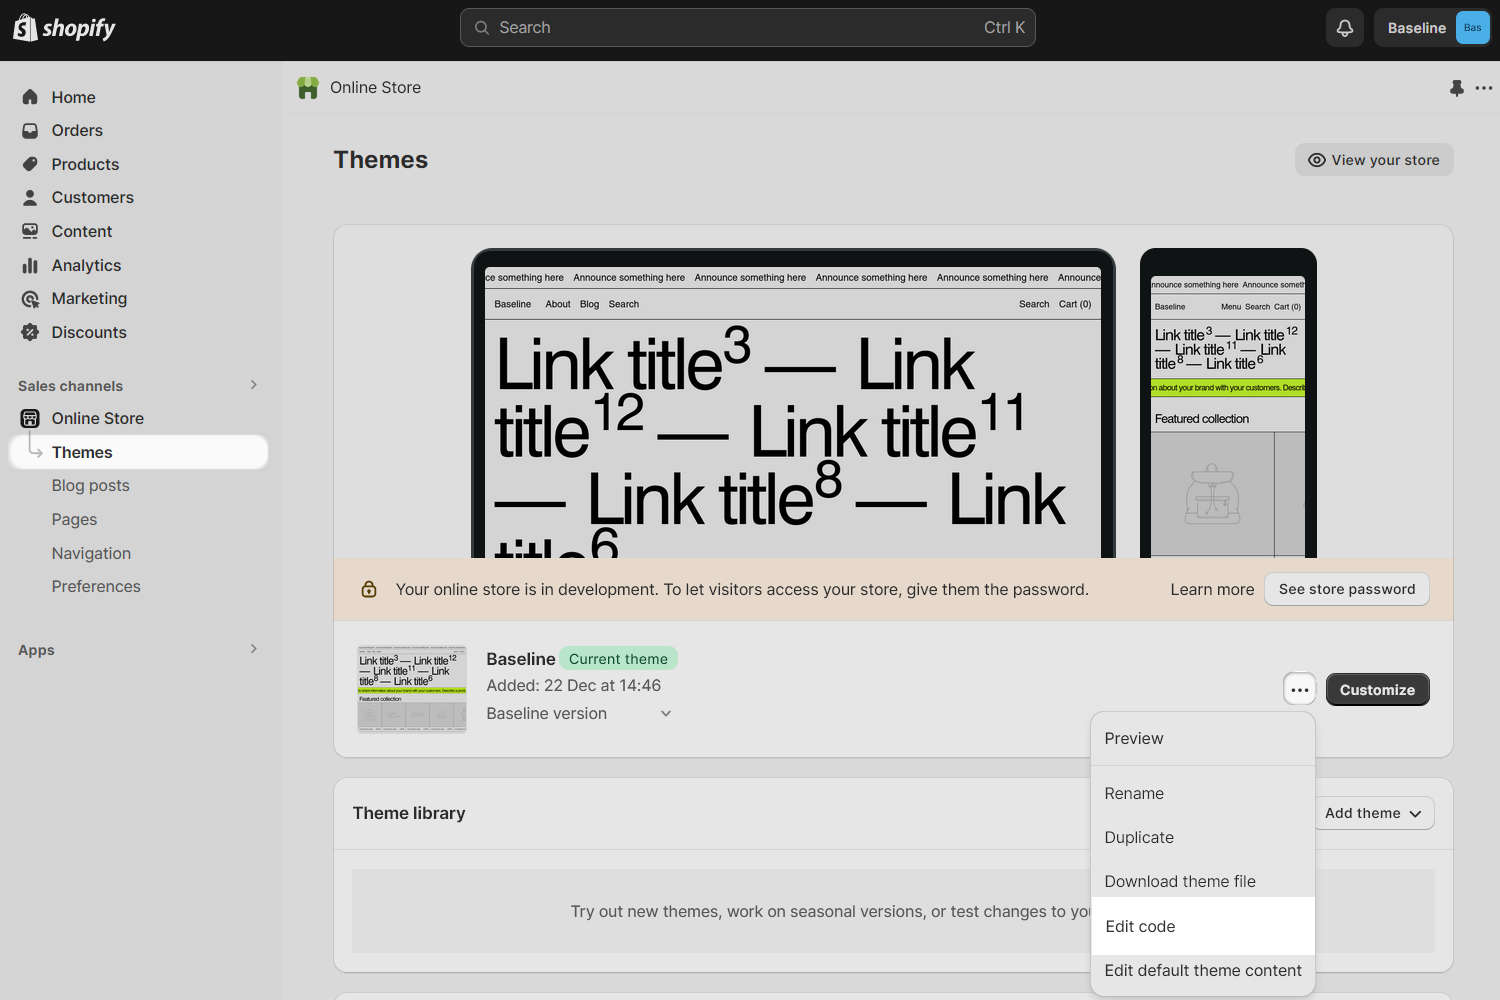 Screenshot of the Editorial theme in the Online Store section of the Shopify Admin with the Actions drop-down menu expanded